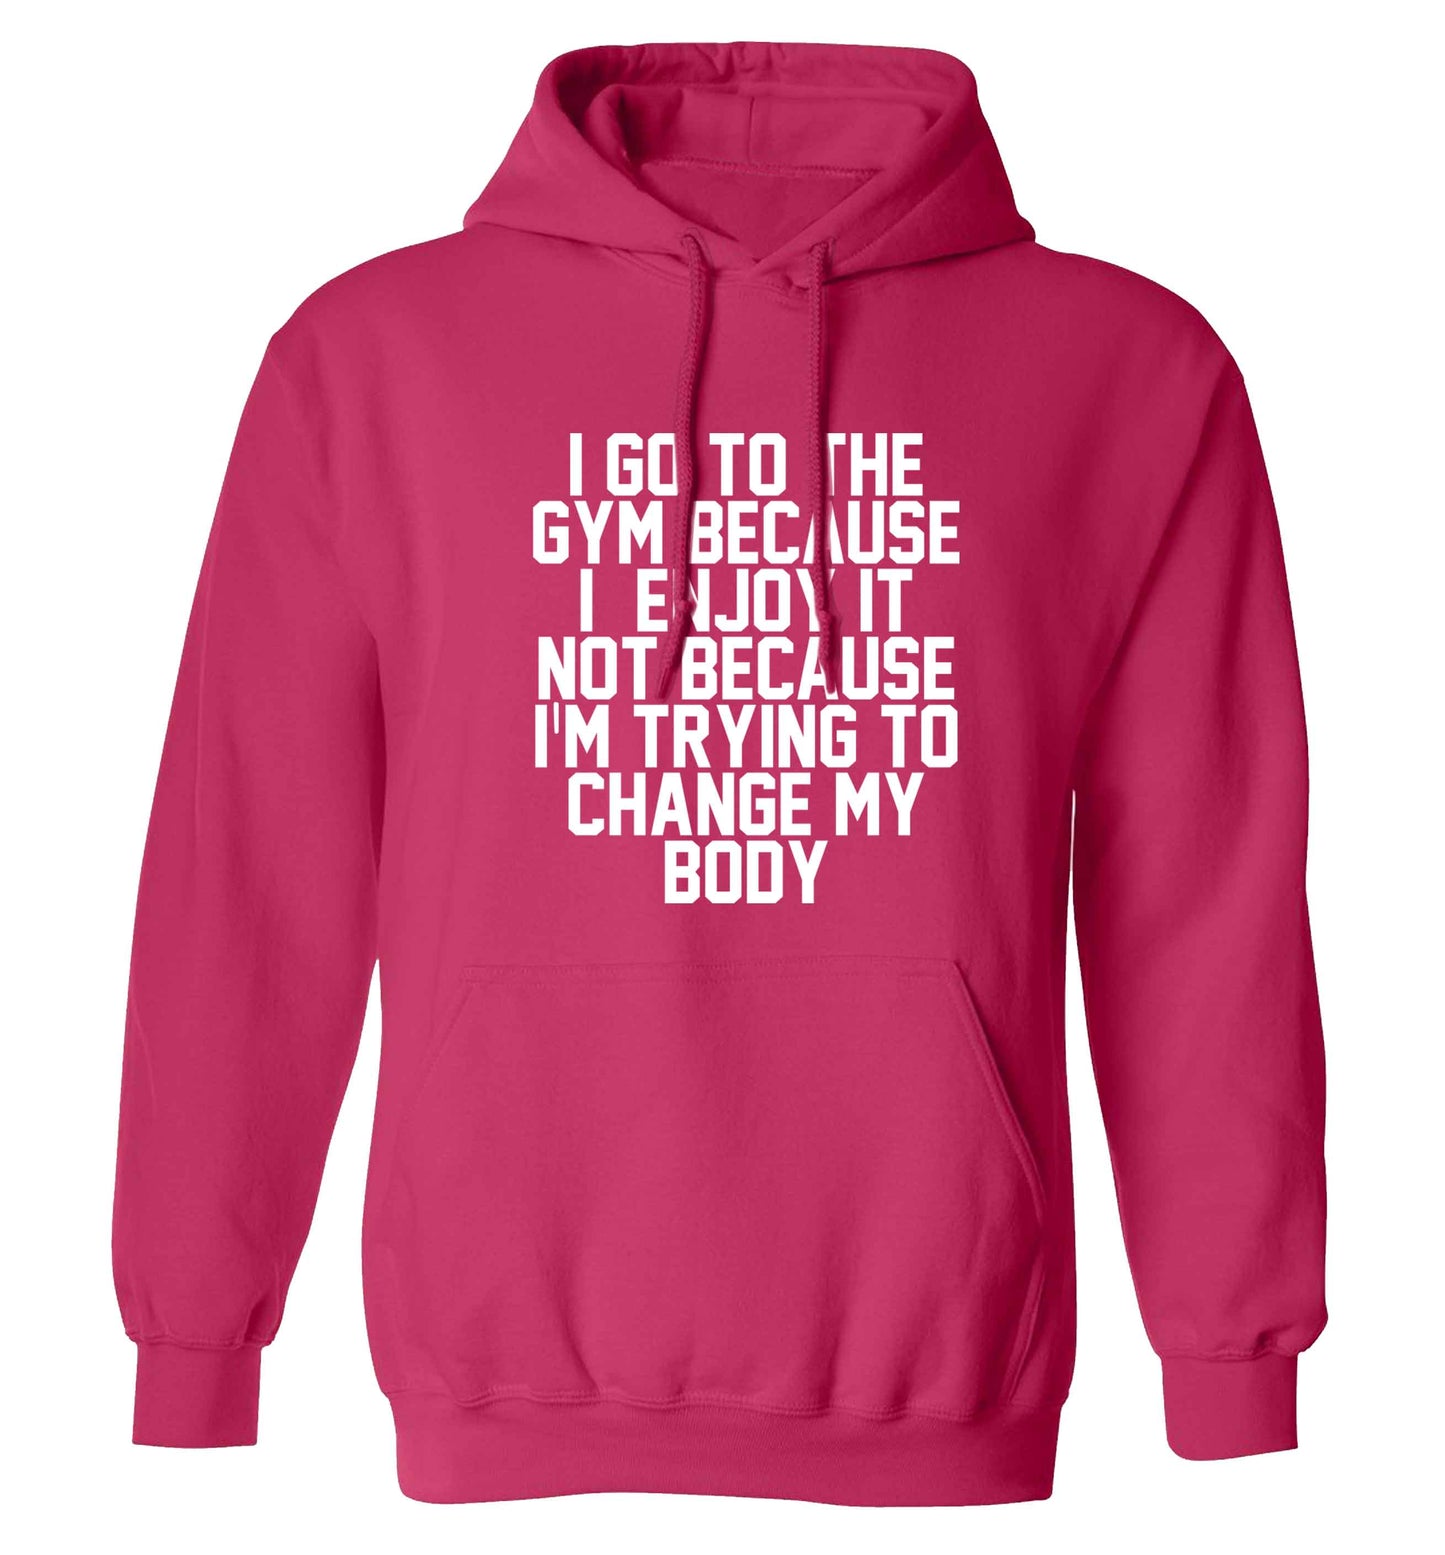 I go to the gym because I enjoy it not because I'm trying to change my body adults unisex pink hoodie 2XL